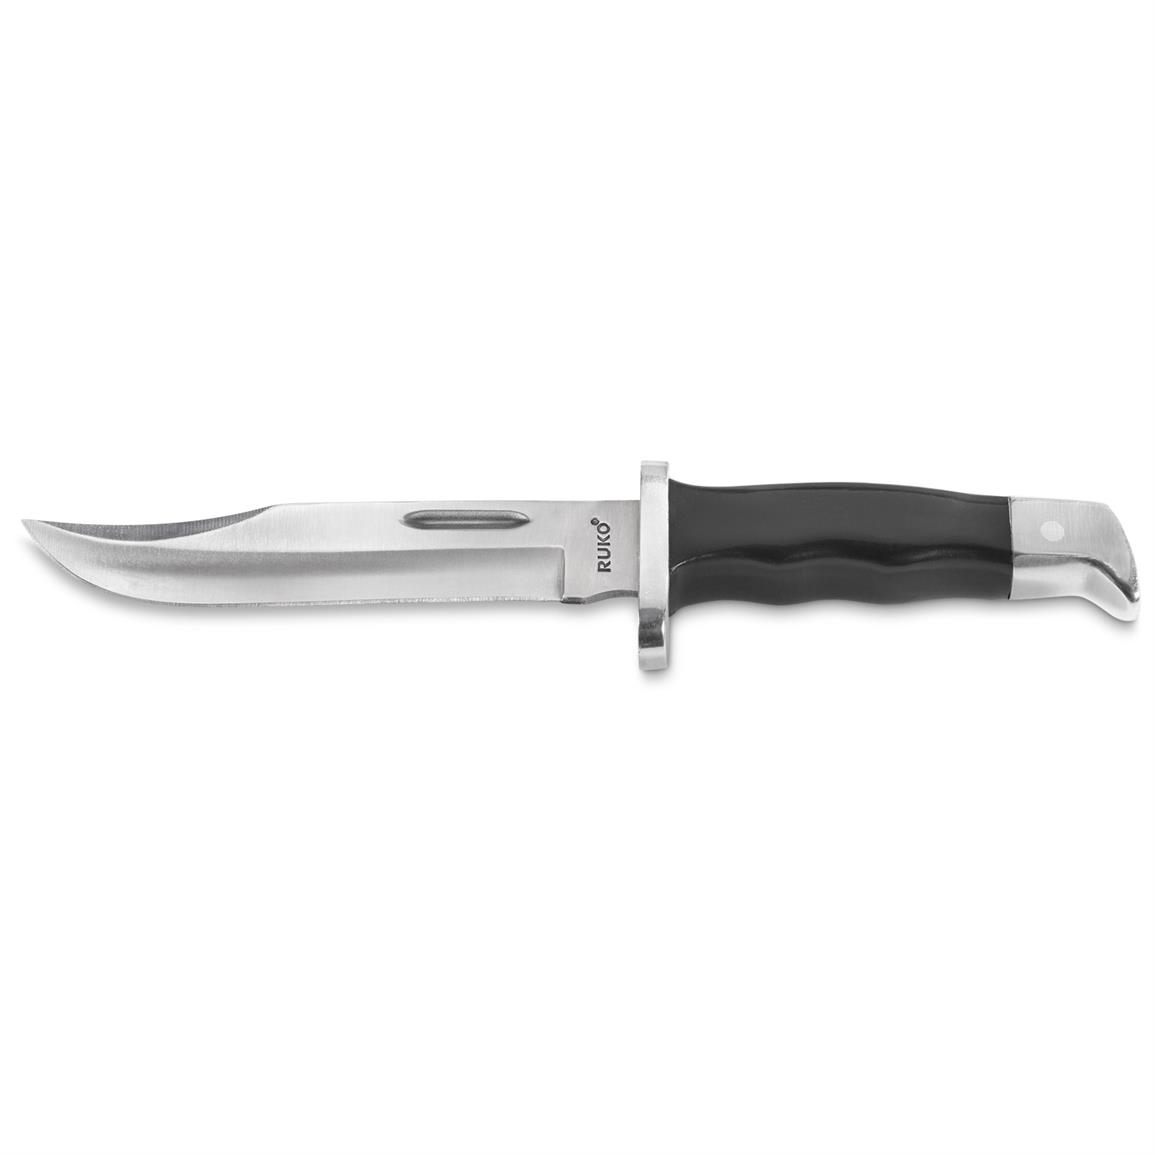 Ruko Outfitter Hunting Knife - 670692, Fixed Blade Knives at Sportsman